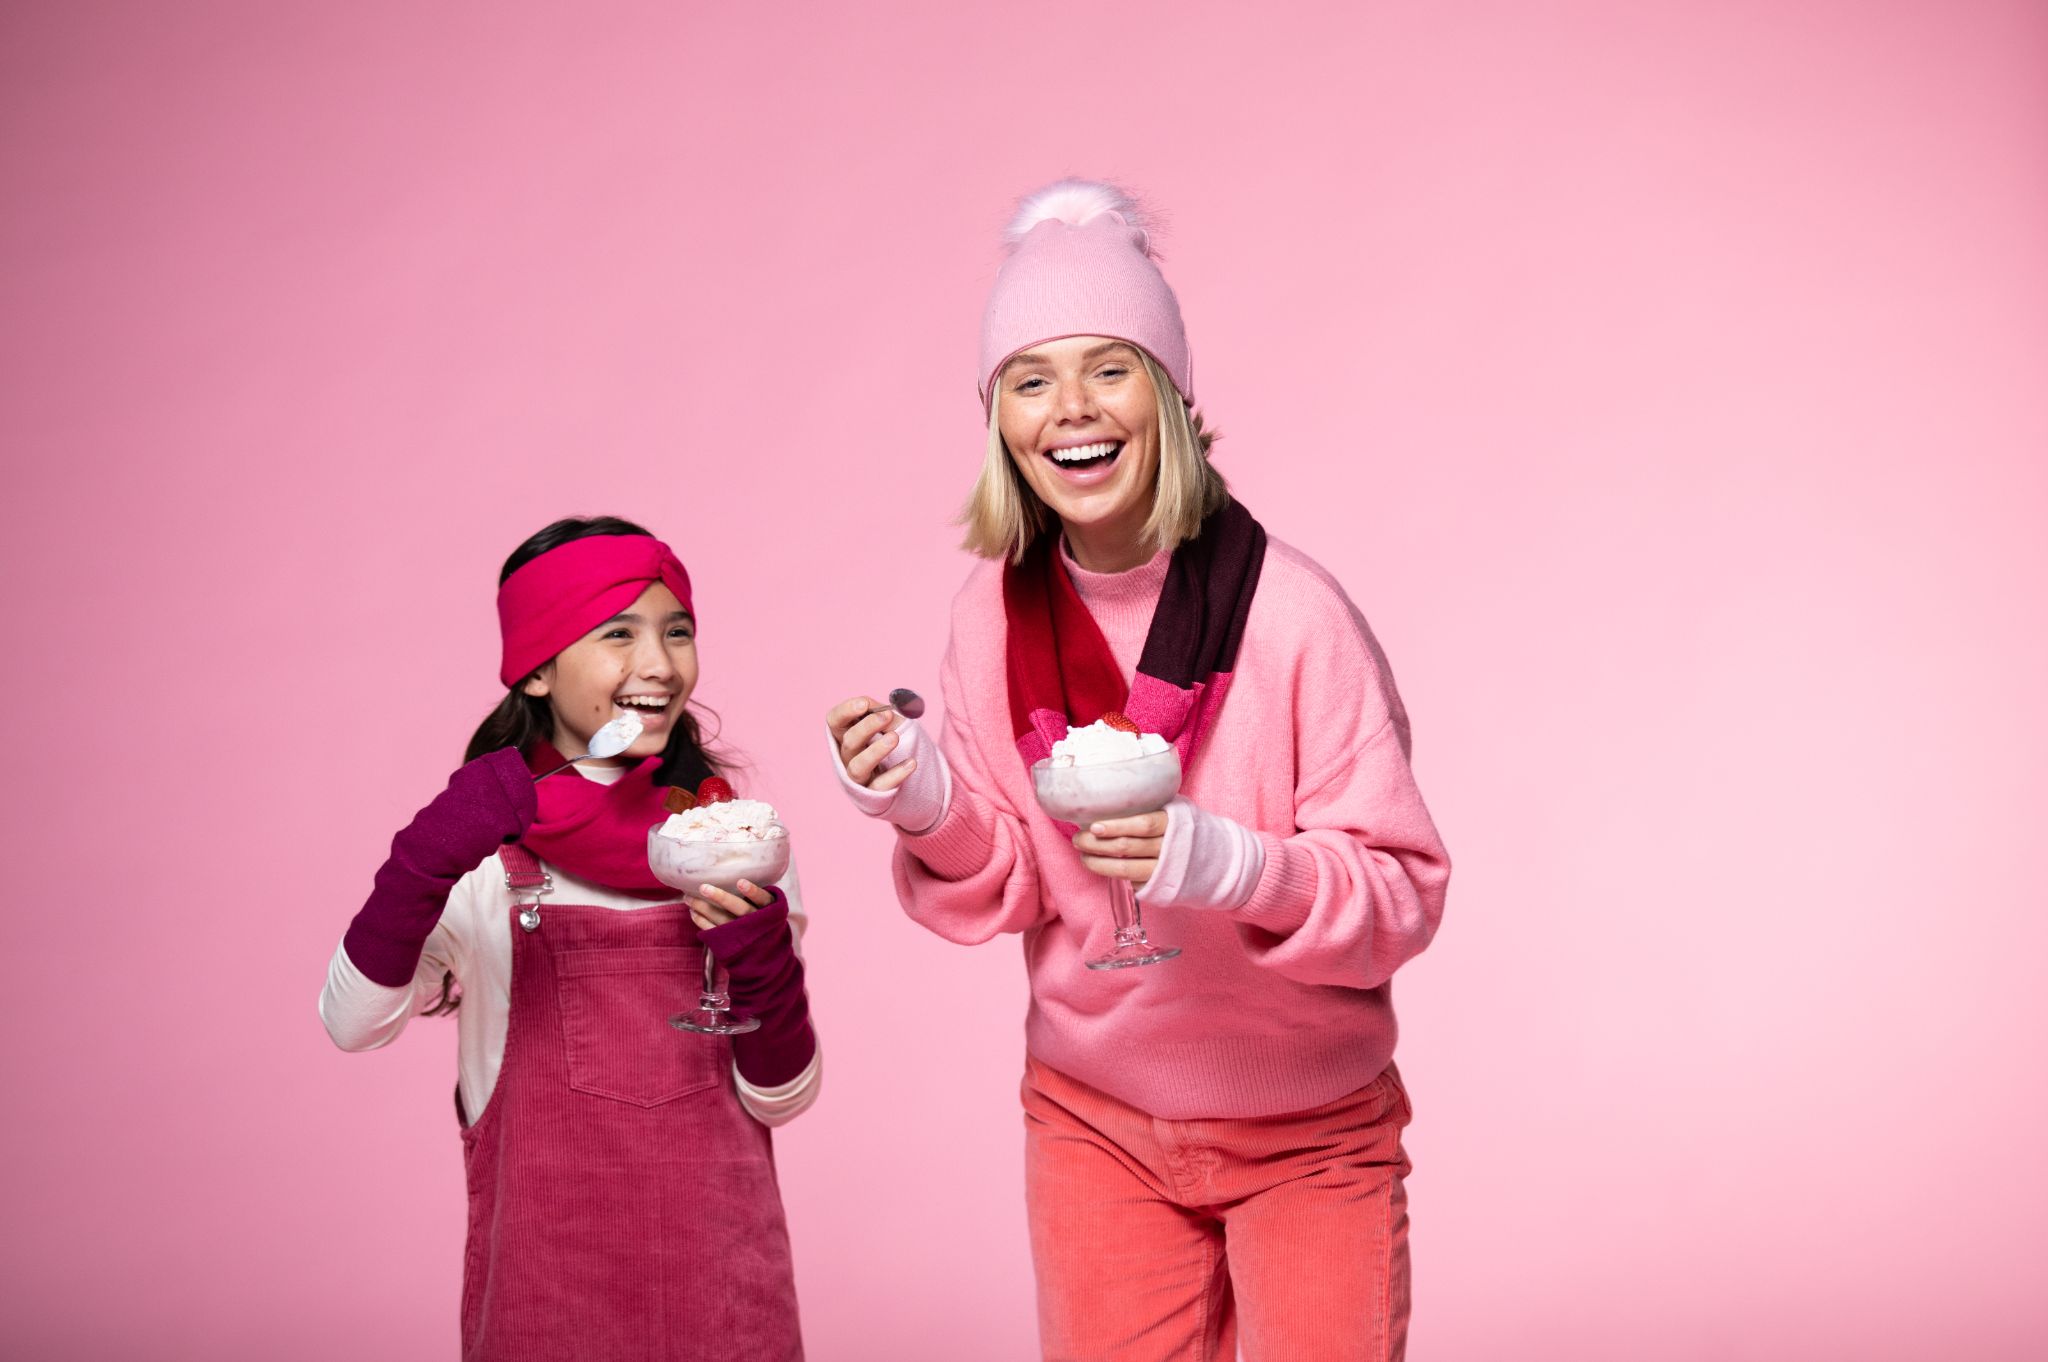 Girl and female models posing for the camera smiling holding ice cream sundaes wearing red and pink outfits respectively against a pink backdrop